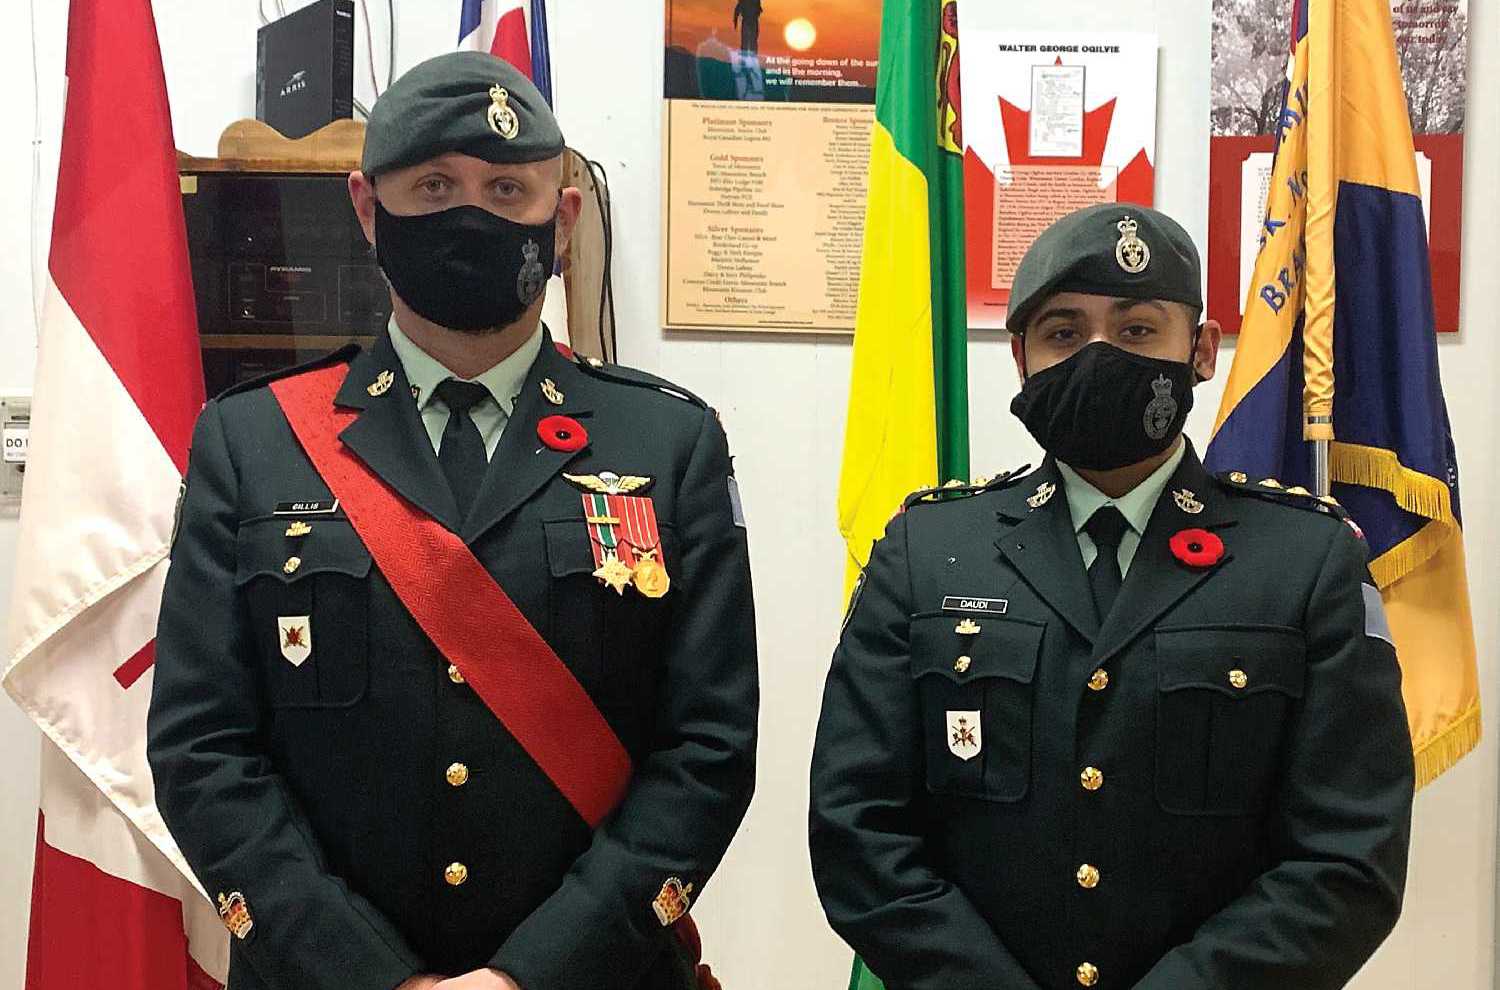 Warrant Officer Christopher Gillis and Captain Zain Daudi are members of the Princess Patricia’s Canadian Light Infantry (PPCLI).  Both soldier’s talk about why the annual Remembrance Day march in Moosomin is significant to them. Left: Warrant Officer Christopher Gillis and Captain Zain Daudi are members of the Princess Patricia’s Canadian Light Infantry.